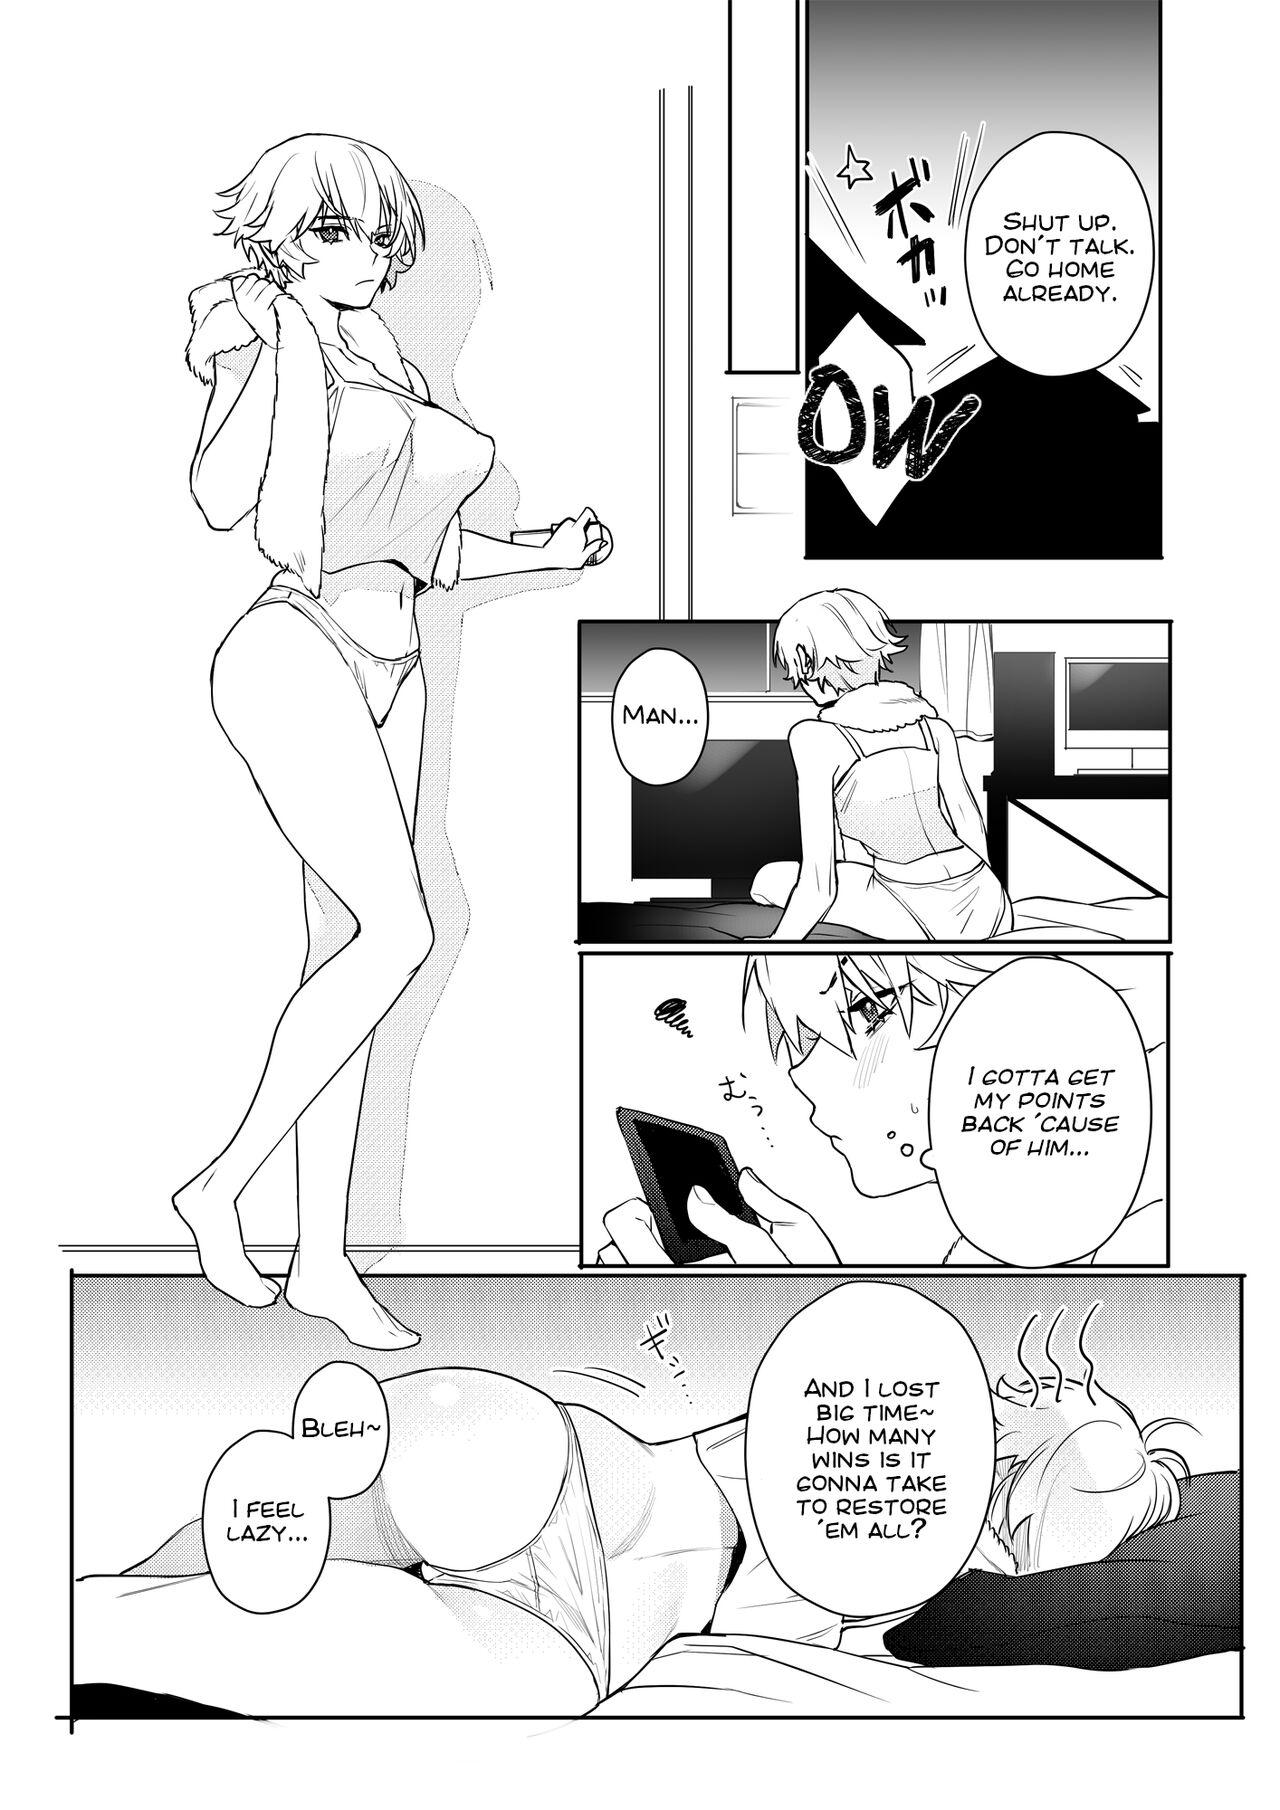 Gamer kanojo no oppai monde mita kekka… | What Happens if You Try to Fondle a Gamer Chick's Boobs... 25